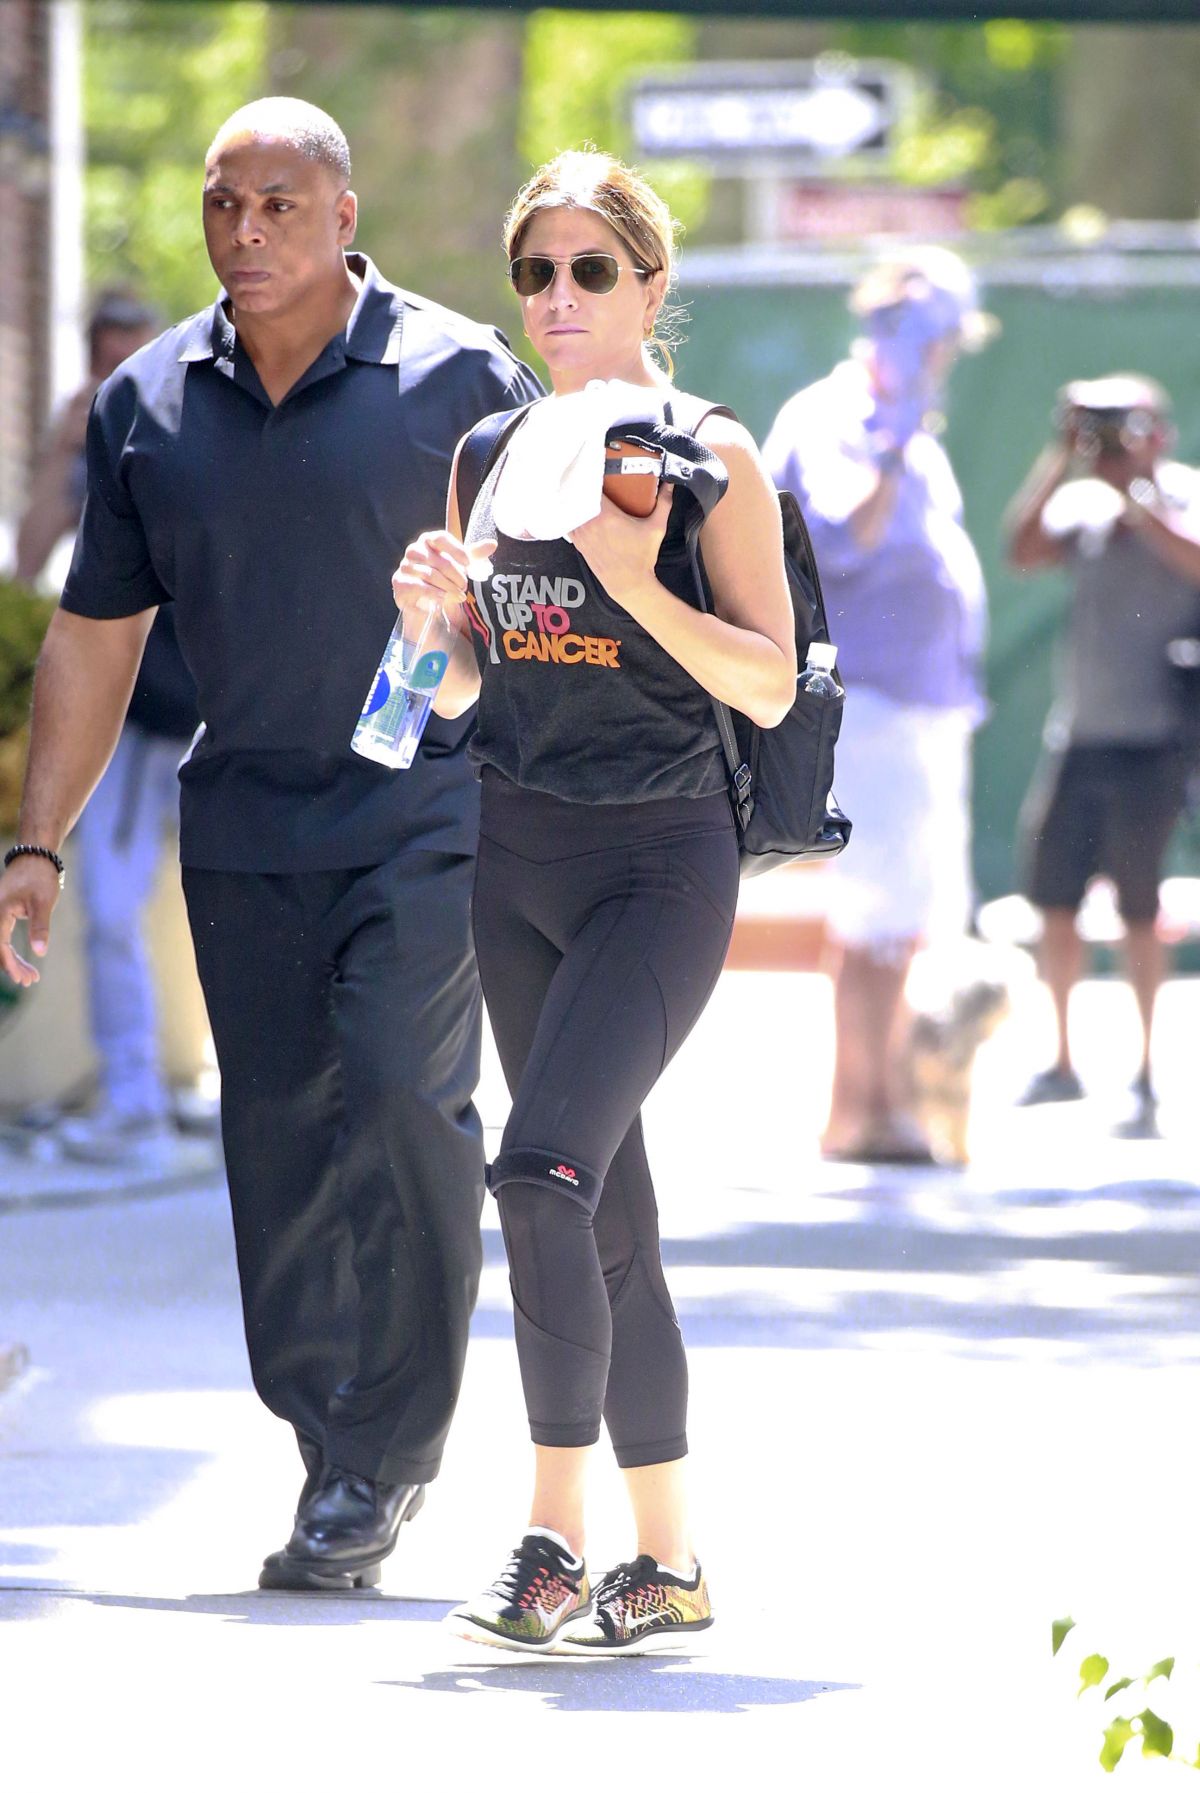 Jennifer Aniston in Spandex Heading to a gym in NY